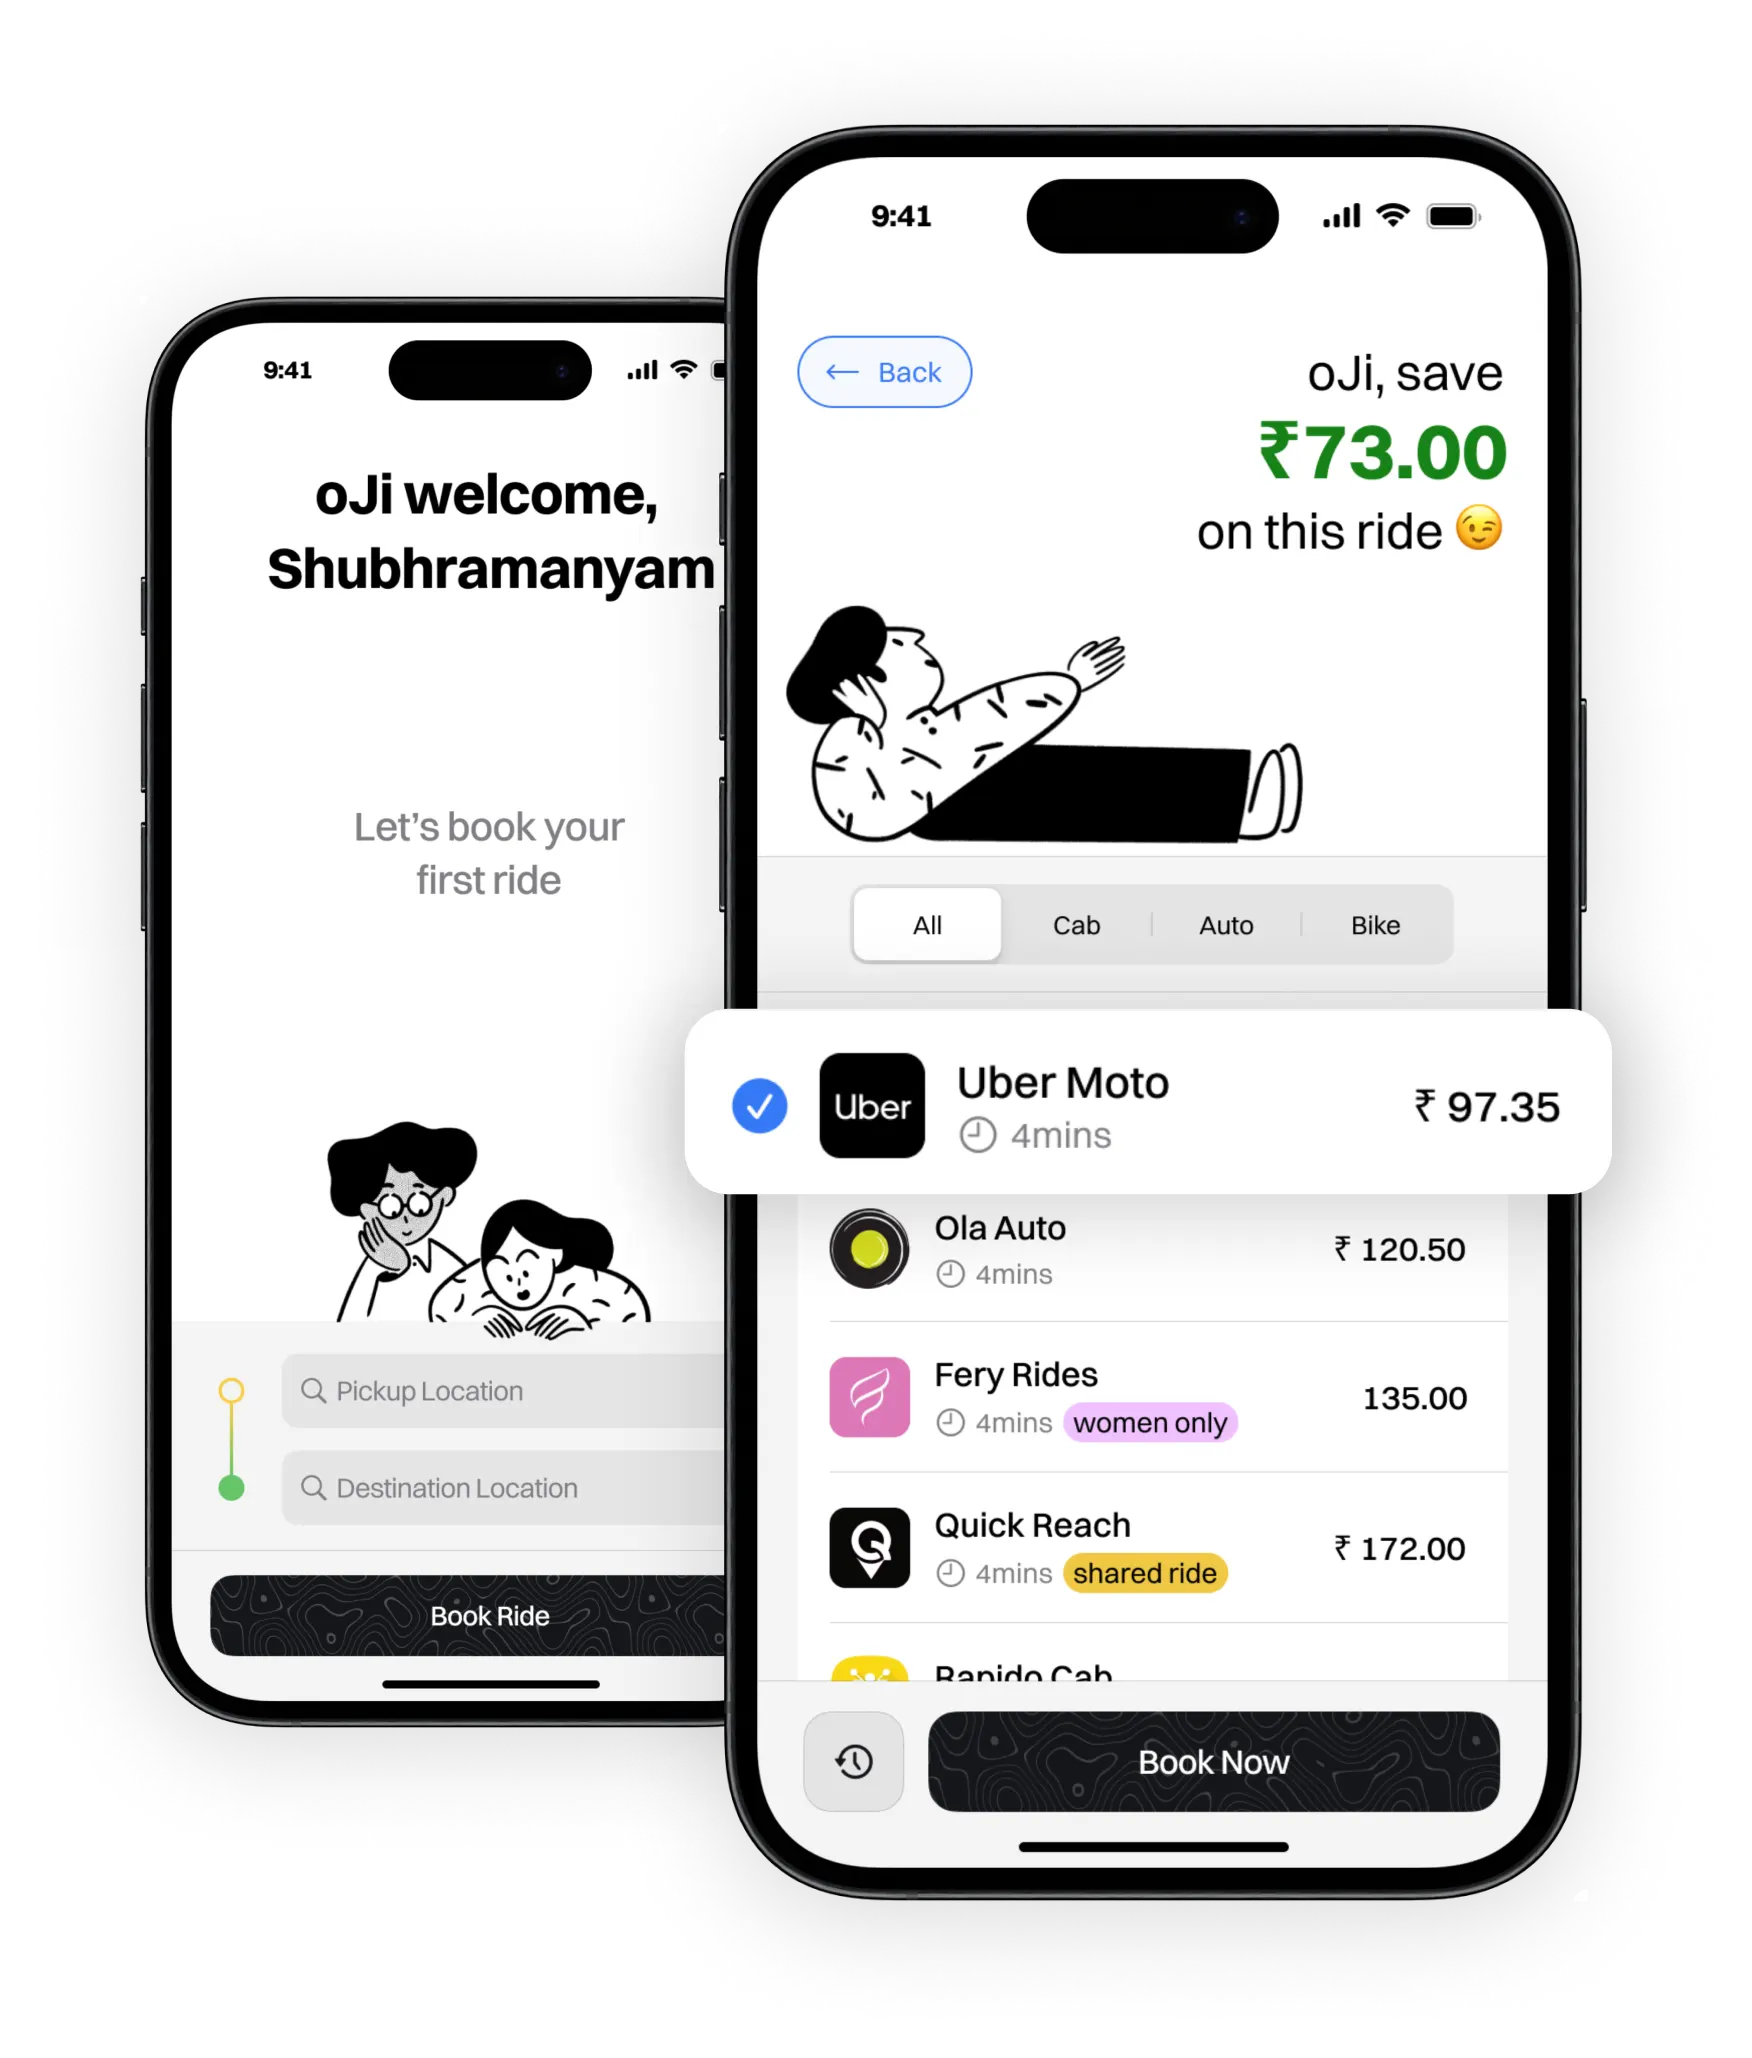 oji mobile app showing different comparison among uber, ola, rapido and others